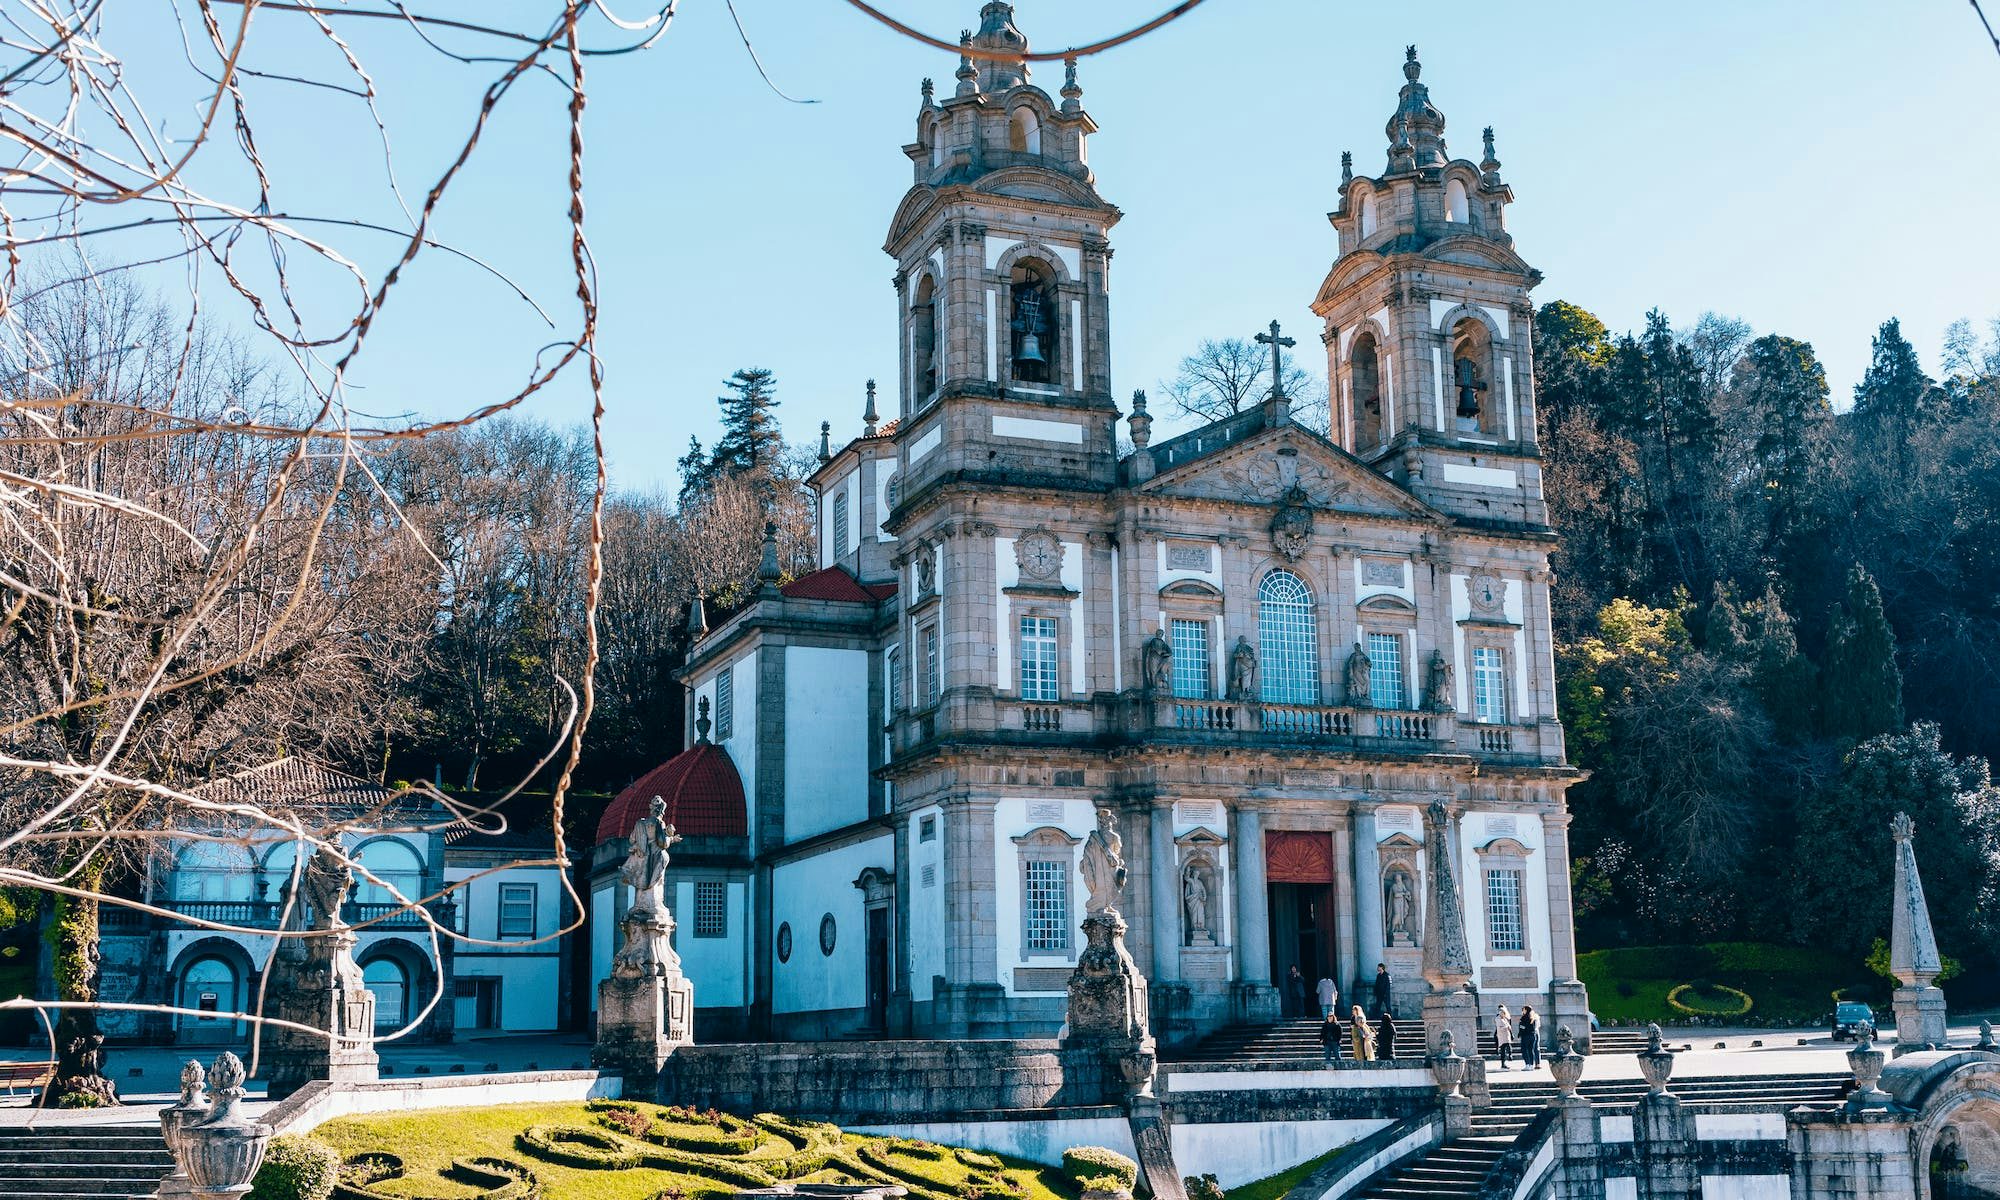 Historic Bom Jesus de Braga church, with its intricate architecture and grandeur, set against a clear sky in Braga, Portugal.